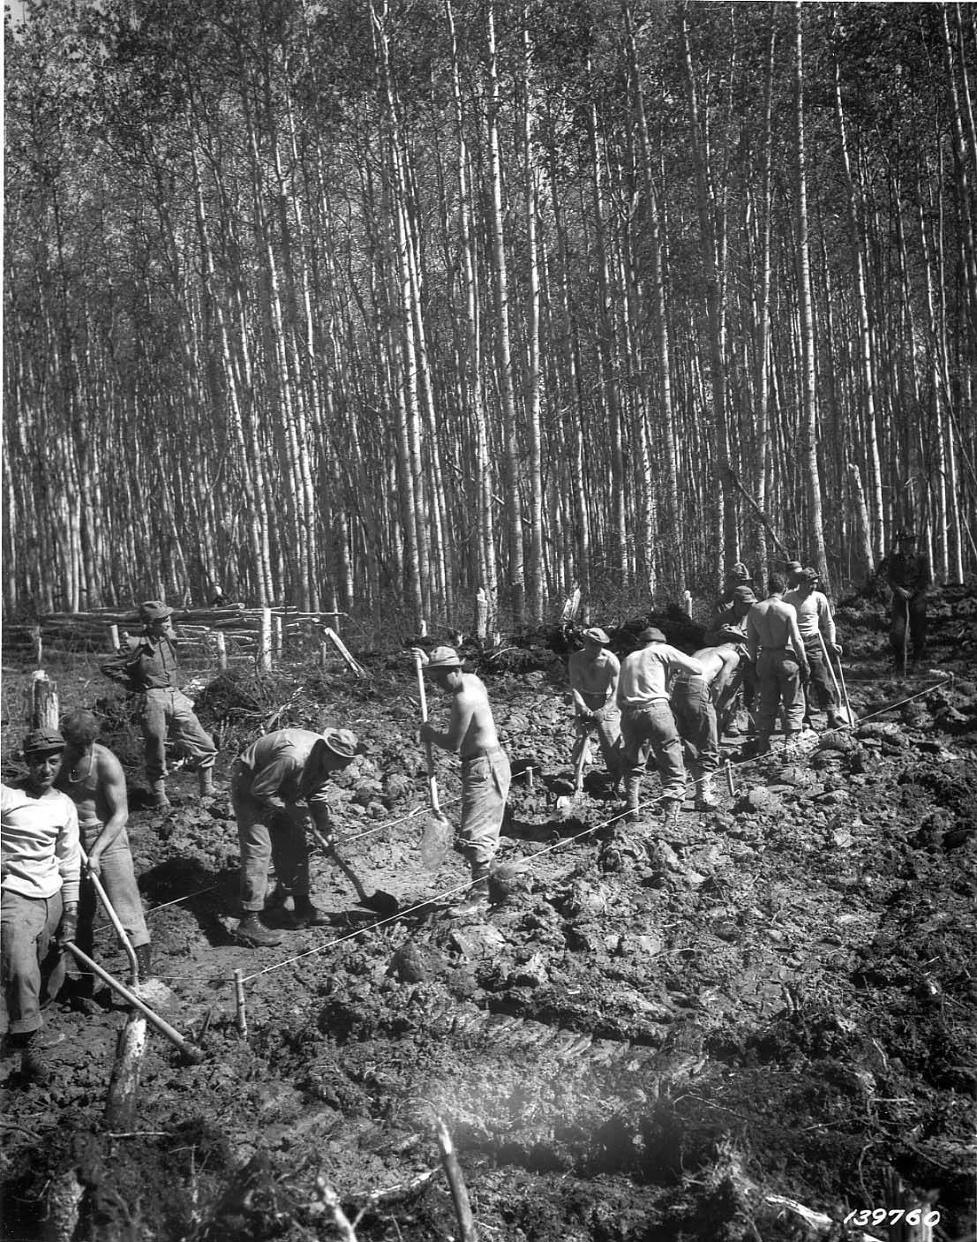 Men excavating ground for ALCAN Highway with hand shovels, circa 1942-43.